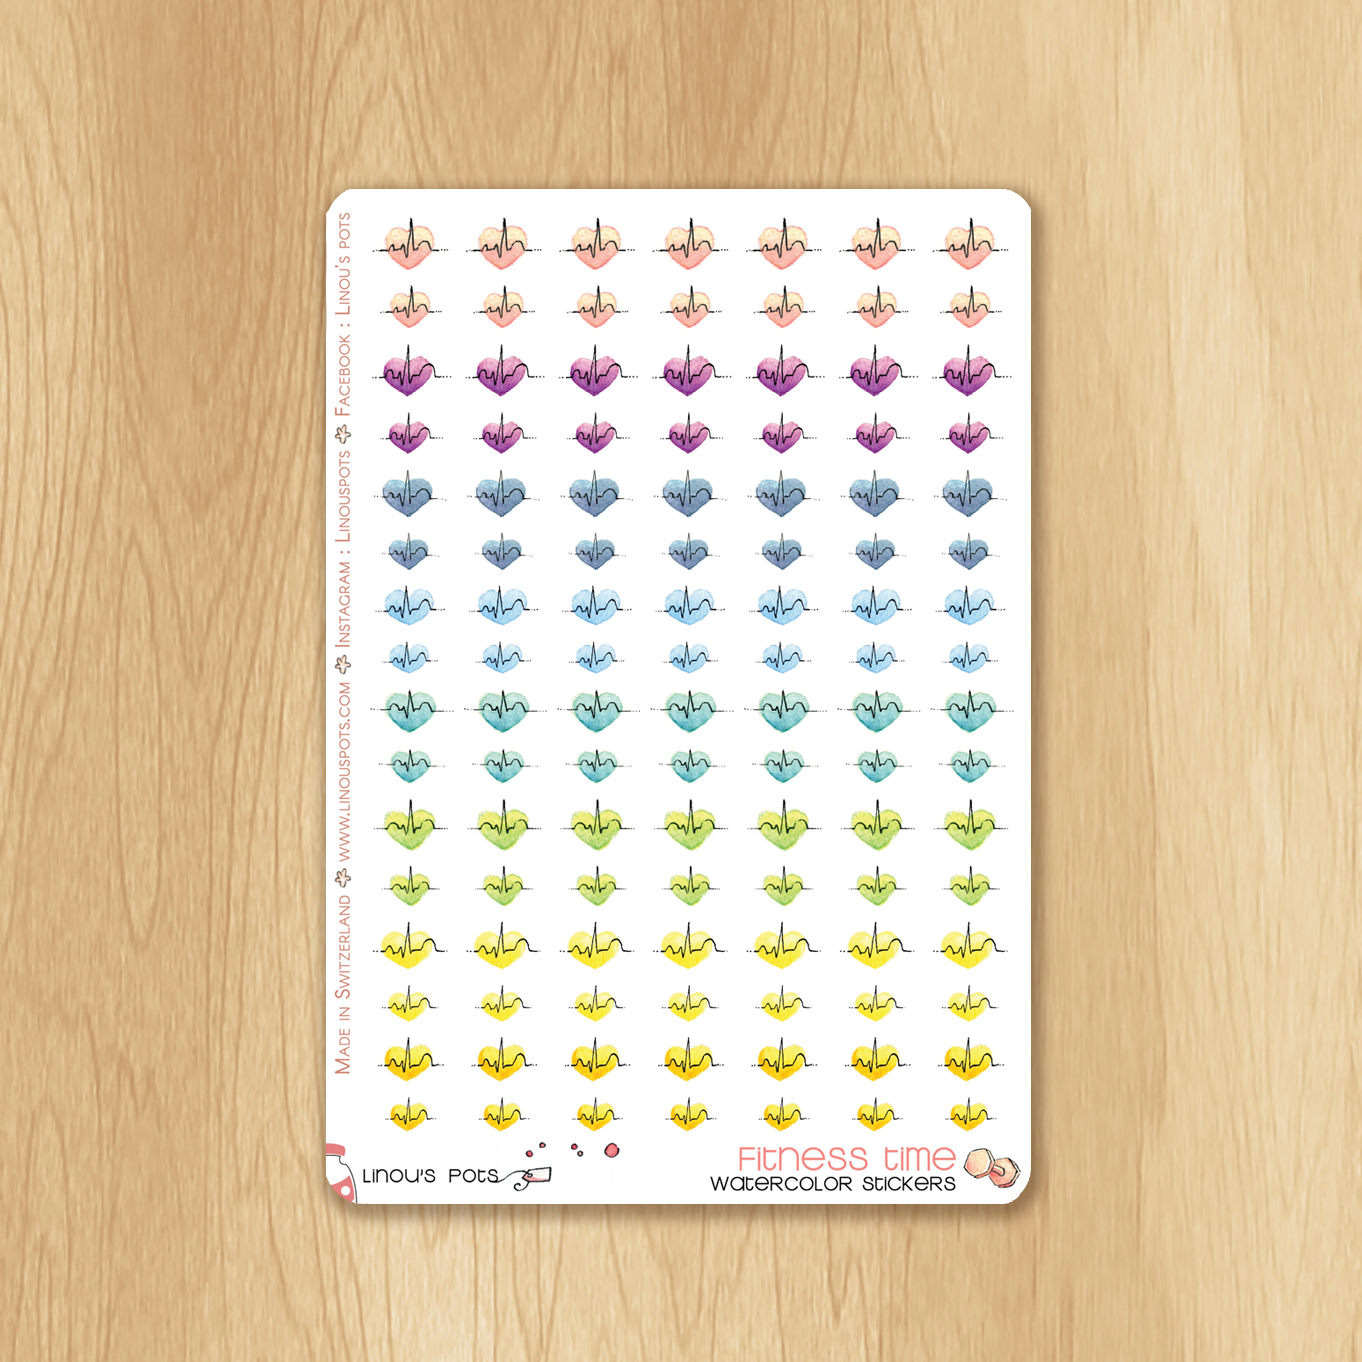 Rainbow Fitness Collection : 56 Cardio Stickers